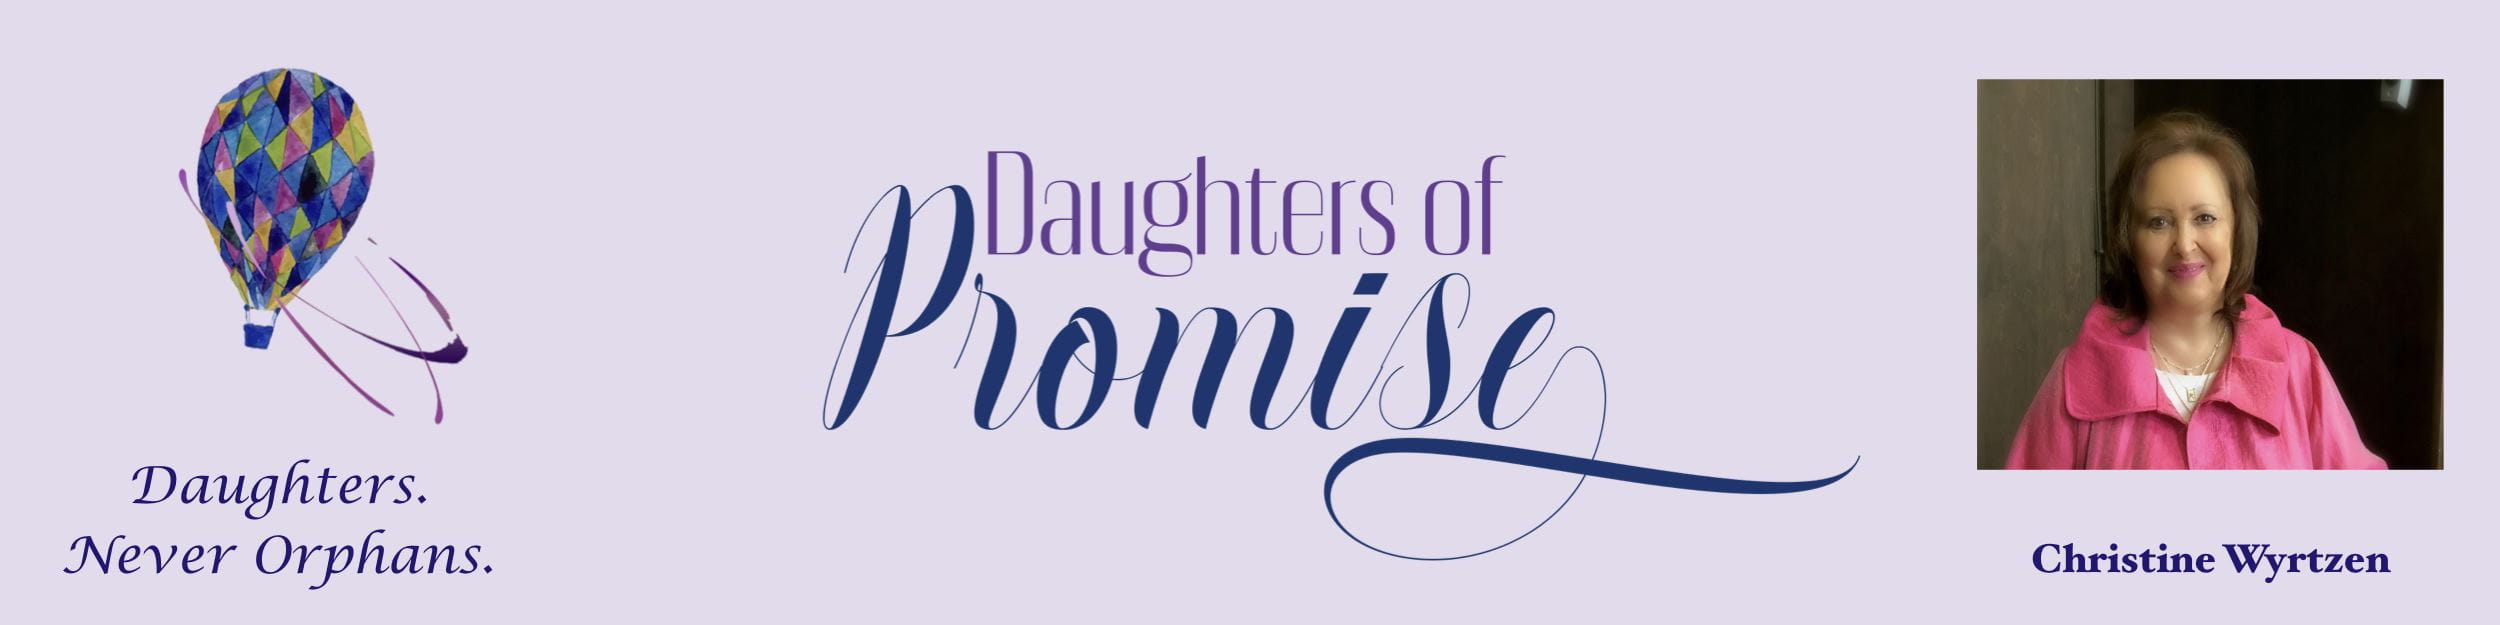 When God Says “Let There Be…” – Daughters of Promise – October 2